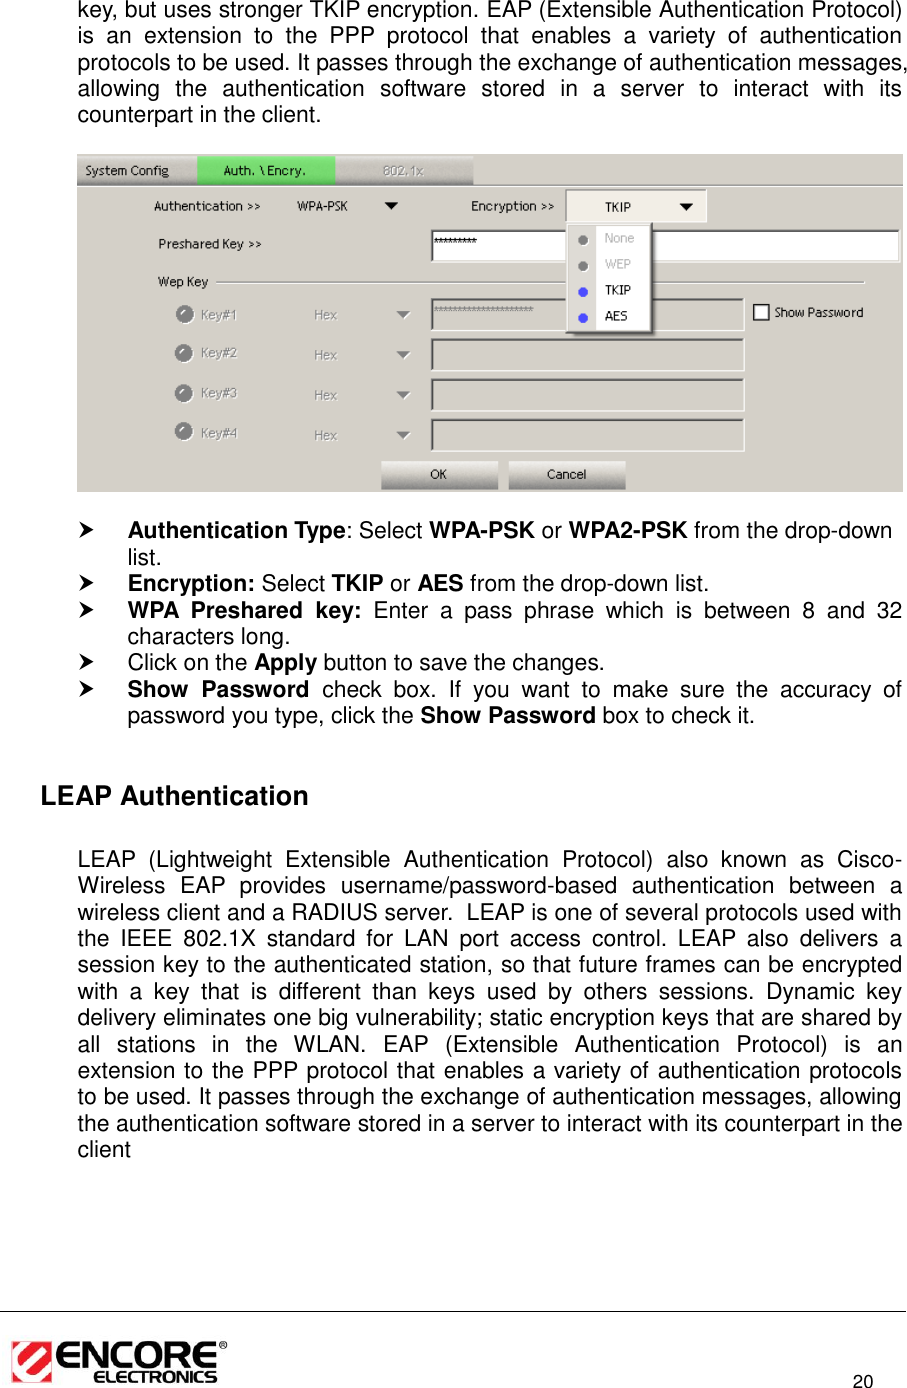                                                                                                                          20  key, but uses stronger TKIP encryption. EAP (Extensible Authentication Protocol) is  an  extension  to  the  PPP  protocol  that  enables  a  variety  of  authentication protocols to be used. It passes through the exchange of authentication messages, allowing  the  authentication  software  stored  in  a  server  to  interact  with  its counterpart in the client.     Authentication Type: Select WPA-PSK or WPA2-PSK from the drop-down list.   Encryption: Select TKIP or AES from the drop-down list.   WPA  Preshared  key:  Enter  a  pass  phrase  which  is  between  8  and  32 characters long.    Click on the Apply button to save the changes.   Show  Password  check  box.  If  you  want  to  make  sure  the  accuracy  of password you type, click the Show Password box to check it.    LEAP Authentication   LEAP  (Lightweight  Extensible  Authentication  Protocol)  also  known  as  Cisco-Wireless  EAP  provides  username/password-based  authentication  between  a wireless client and a RADIUS server.  LEAP is one of several protocols used with the  IEEE  802.1X  standard  for  LAN  port  access  control.  LEAP  also  delivers  a session key to the authenticated station, so that future frames can be encrypted with  a  key  that  is  different  than  keys  used  by  others  sessions.  Dynamic  key delivery eliminates one big vulnerability; static encryption keys that are shared by all  stations  in  the  WLAN.  EAP  (Extensible  Authentication  Protocol)  is  an extension to the PPP protocol that enables a variety of authentication protocols to be used. It passes through the exchange of authentication messages, allowing the authentication software stored in a server to interact with its counterpart in the client  